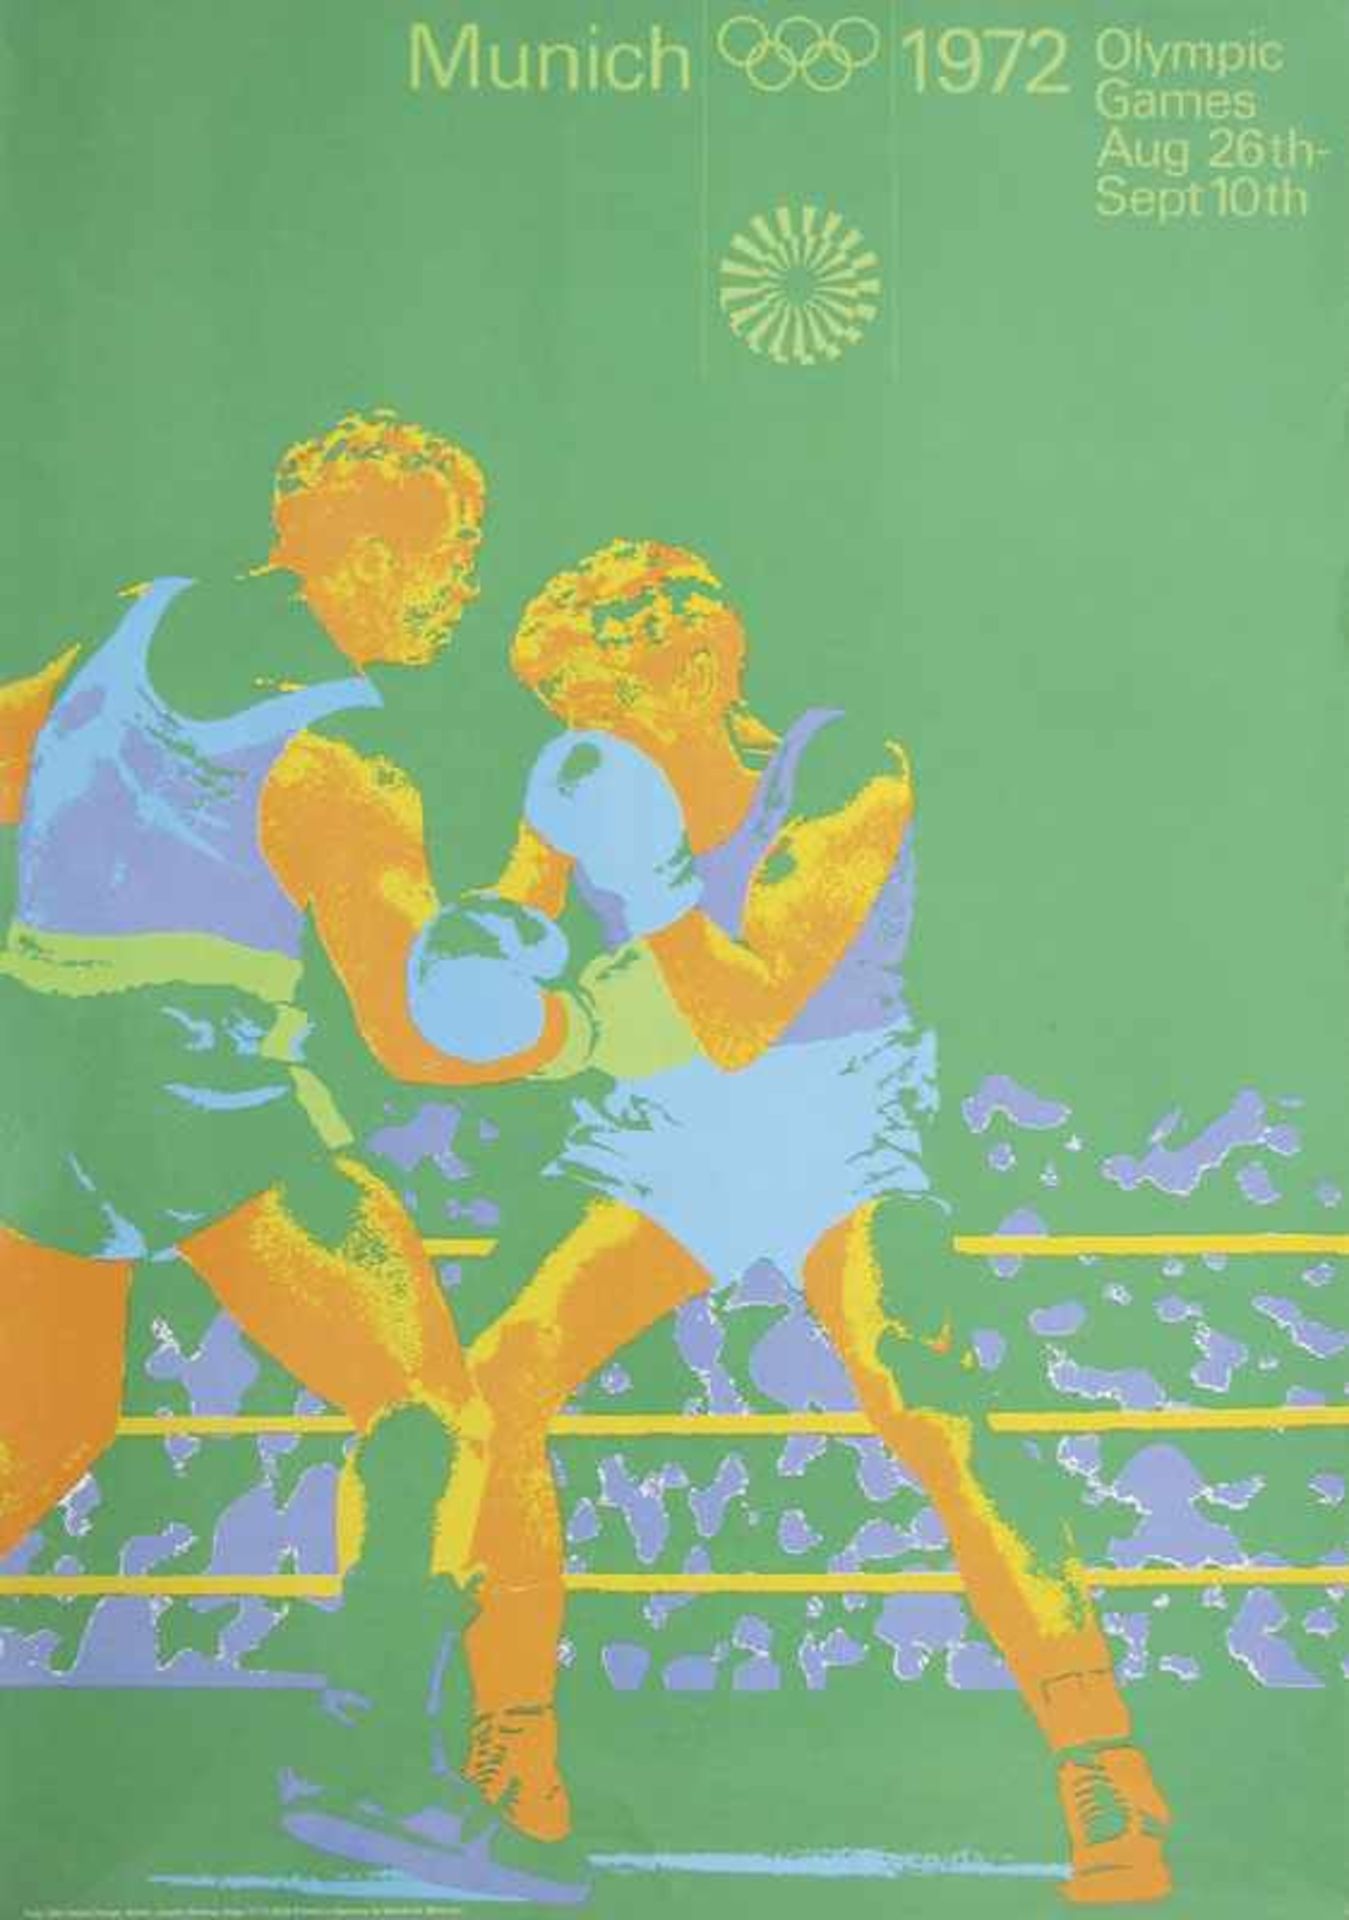 Olympic Games Munich 1972 Official Poster Boxing - Boxing; Design Ottl Aichner, 84x59 cm, english